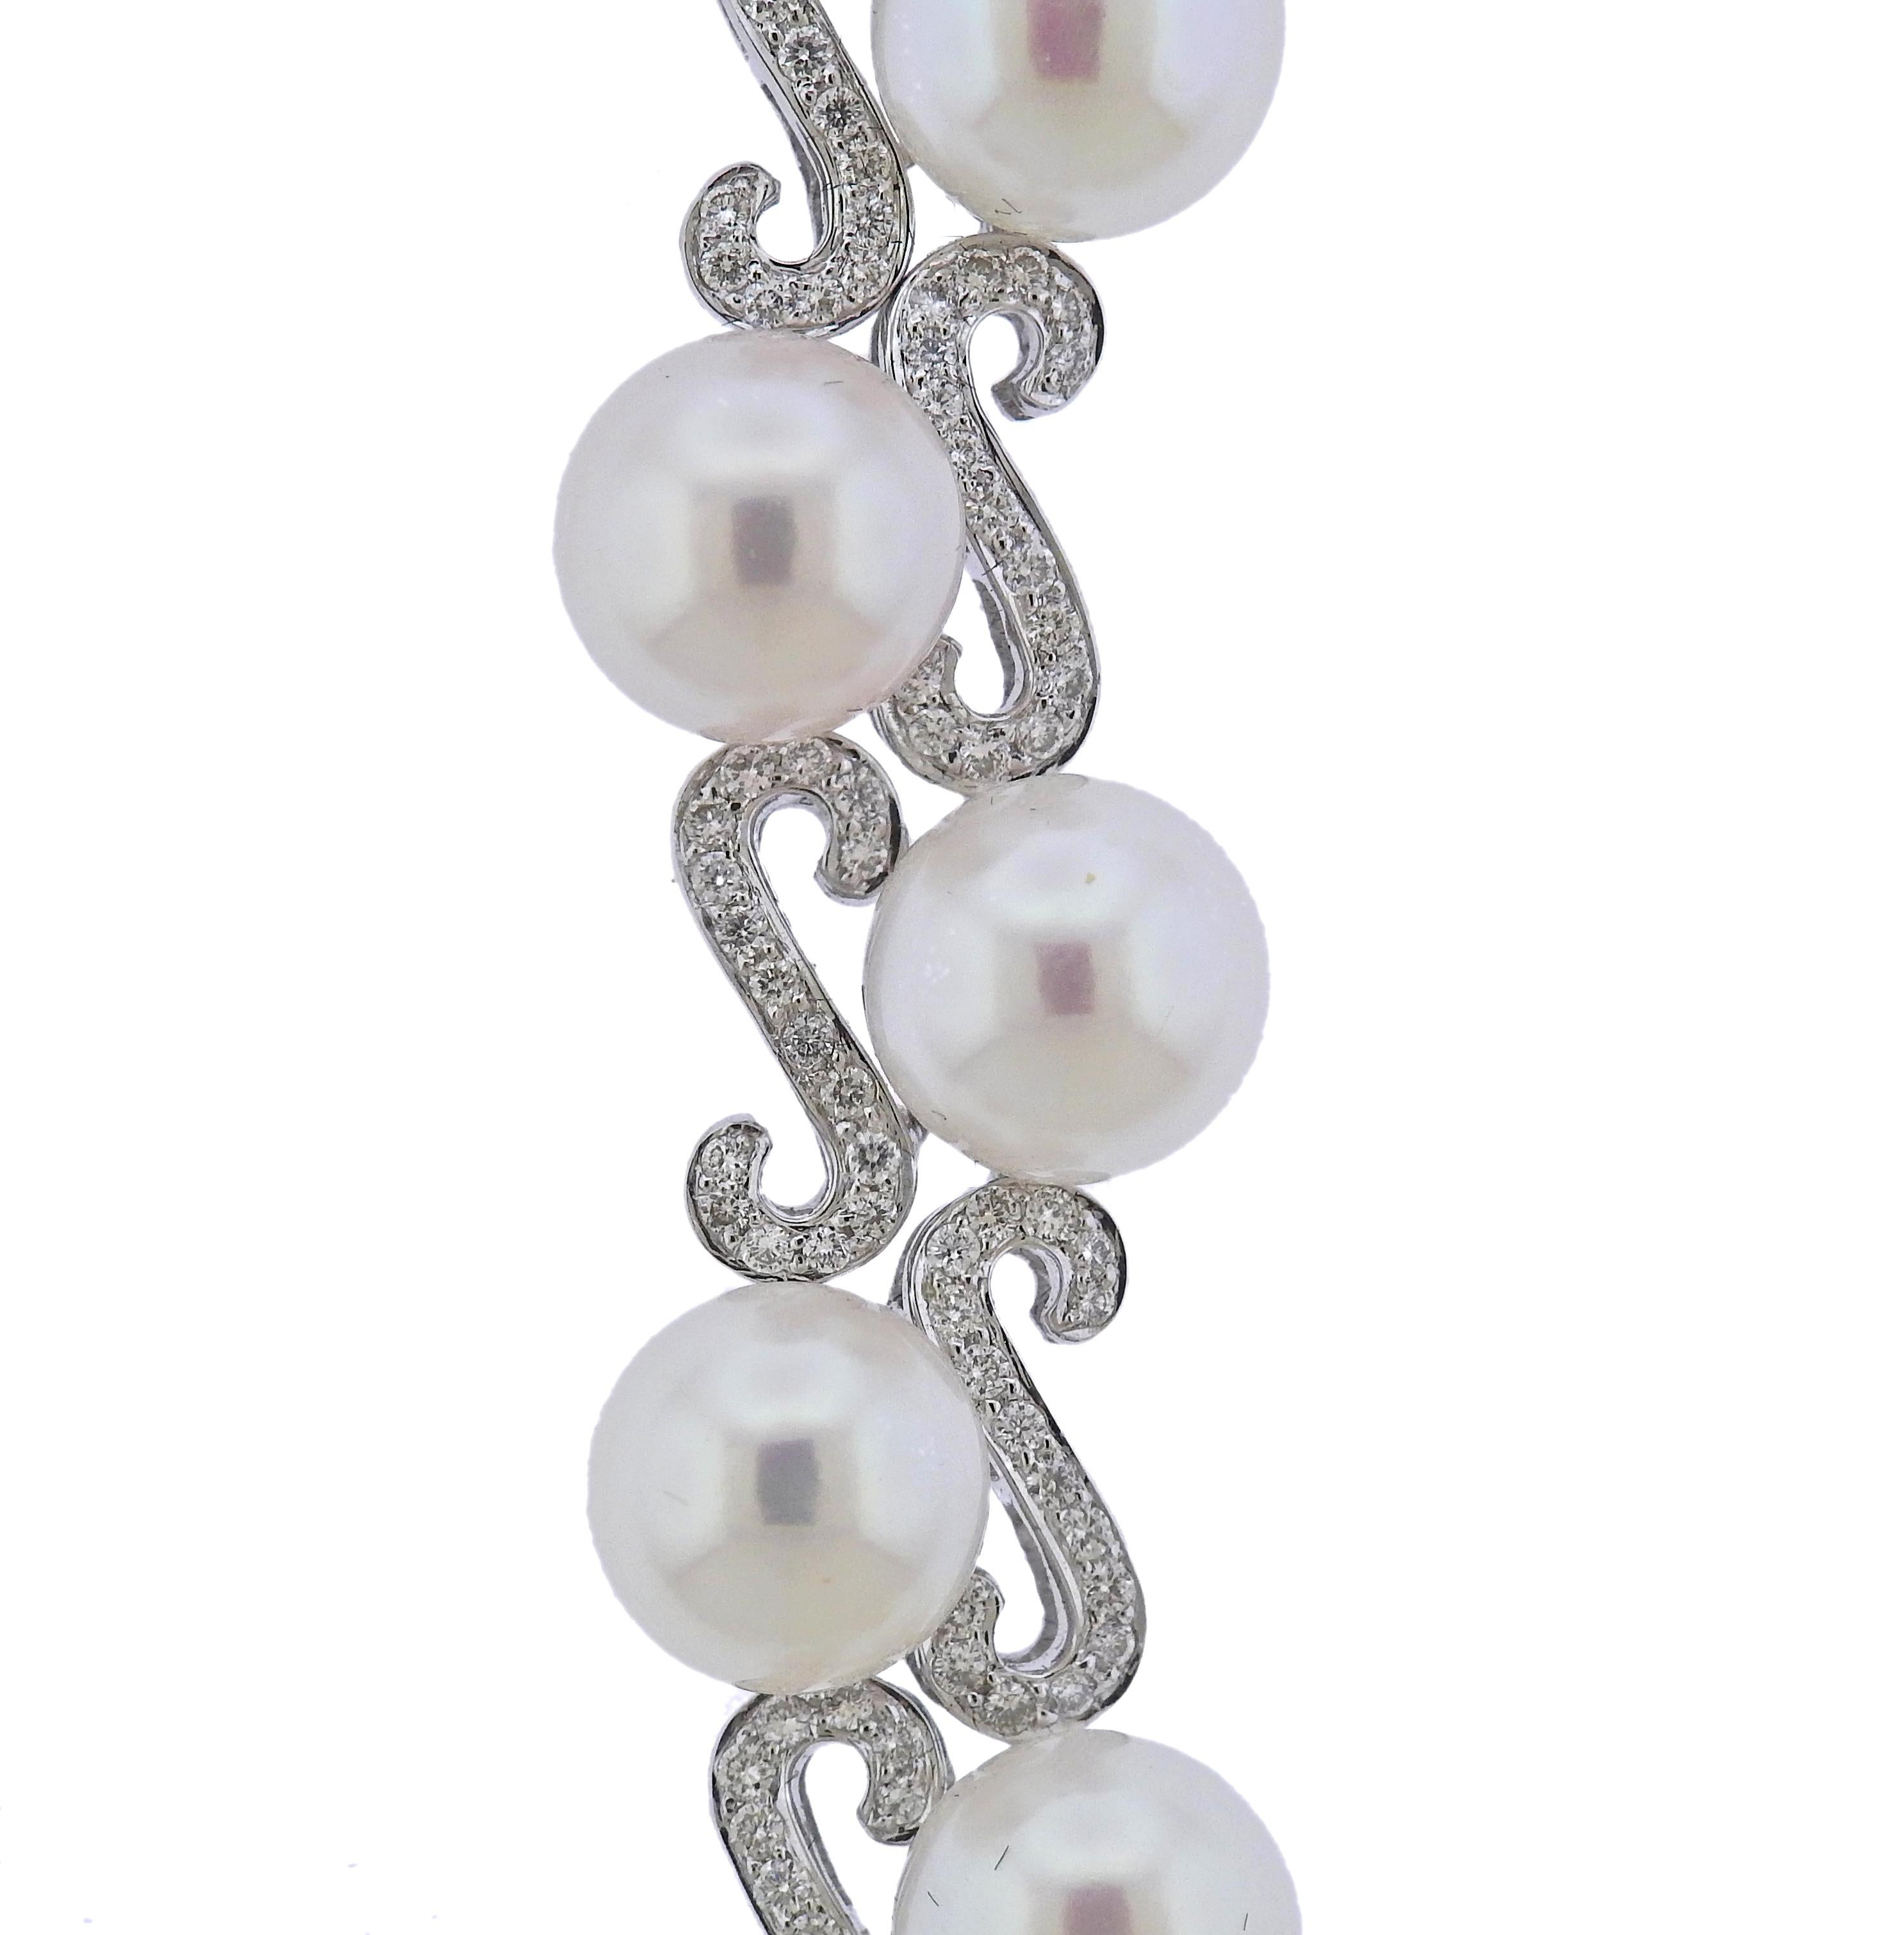 18k white gold bracelet, with 2.16ctw in diamonds and 10-10.5mm pearls. Bracelet is 6.5